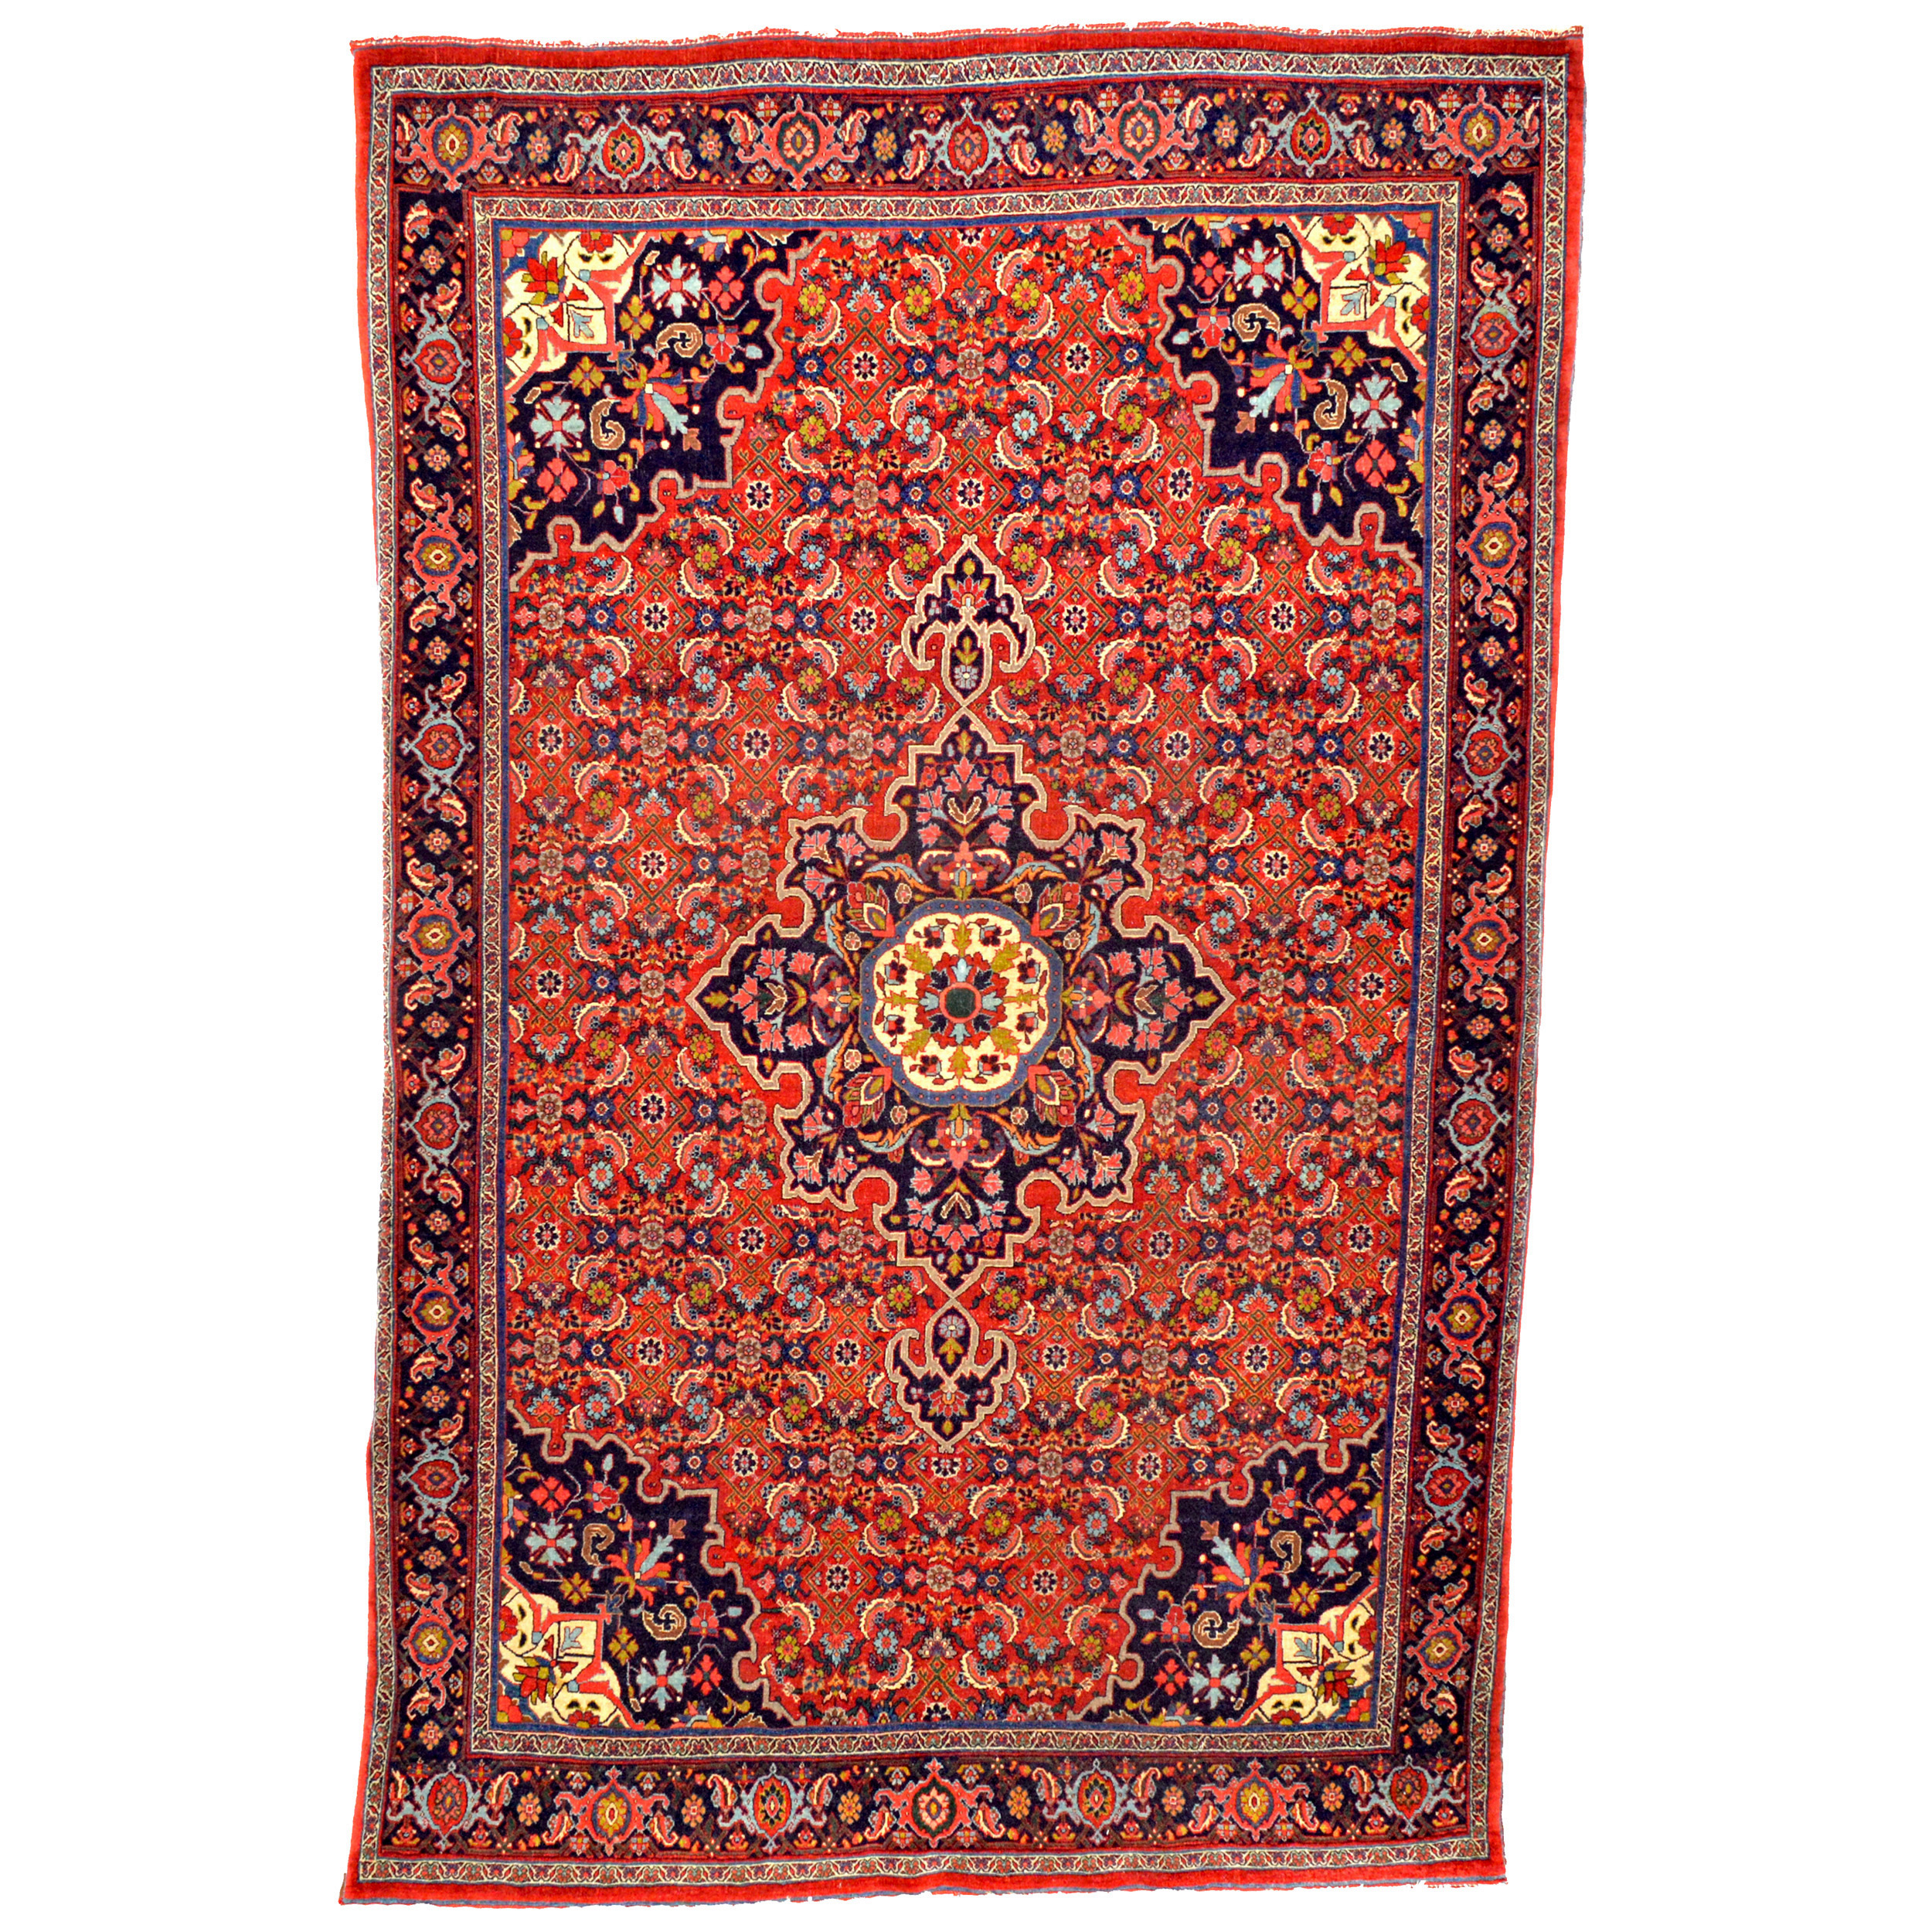 Antique Halvai Bidjar rug with the classical Herati design on a red field with a navy medallion and border, circa 1920, northwest Persia - Douglas Stock Gallery, antique Persian rugs South Natick, Wellesley, Weston, Boston,MA area antique rugs